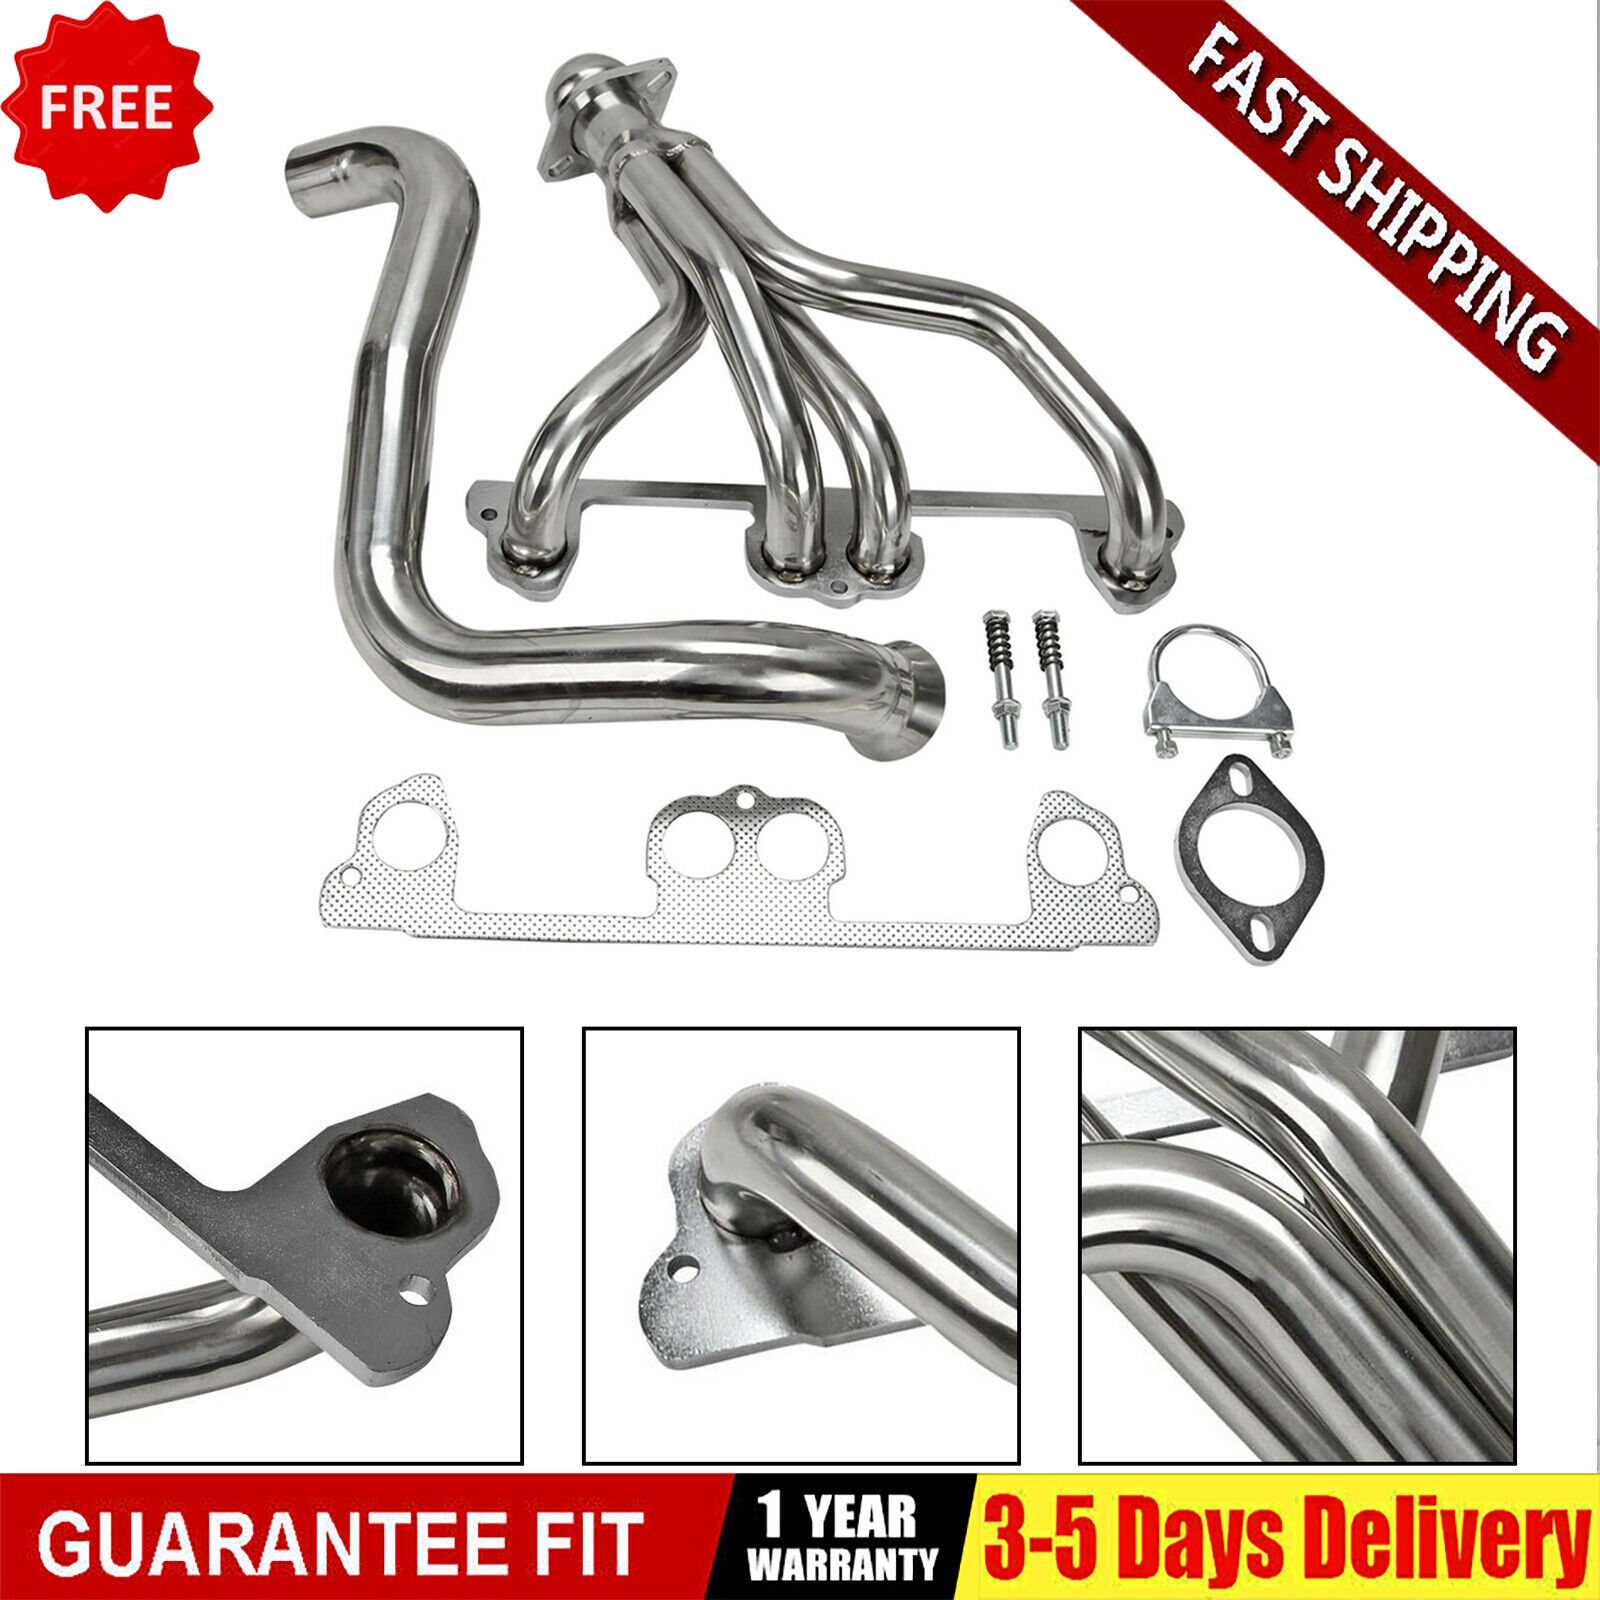 NEW 1× Exhaust Stainless Header Kit Manifold For Jeep Wrangler TJ 2.5L L4 97-99